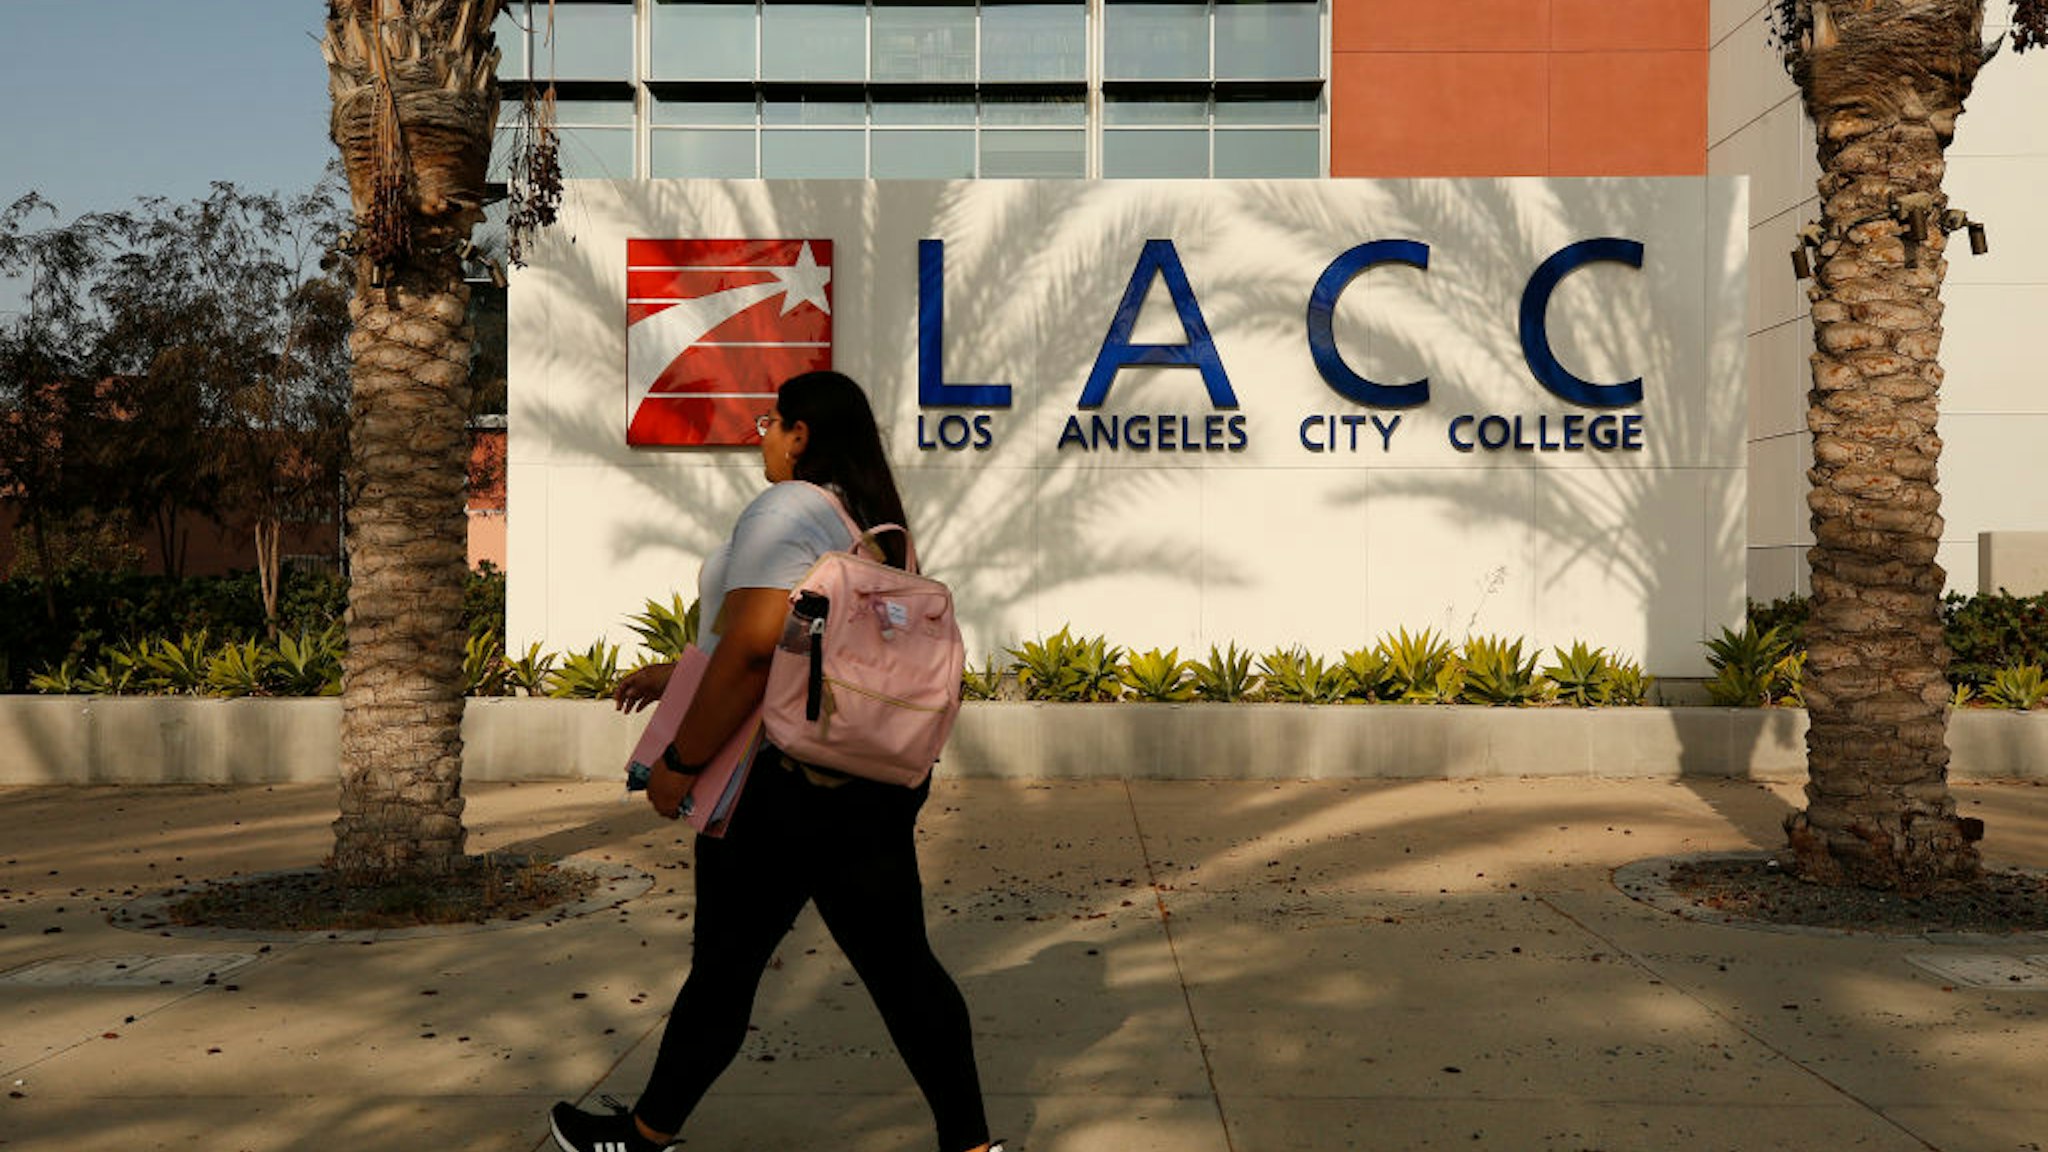 LOS ANGELES, CA - AUGUST 30: A portion of the enrolled student body returns to in-class instruction for the reopening on Monday August 30th of Los Angeles City College (LACC) in the LACCD, the nation's largest community college district. School will look a bit different this year, as masks will be required on-campus. A majority of students at LACC are continuing with online classes for this Fall semester LA City College on Monday, Aug. 30, 2021 in Los Angeles, CA. (Al Seib / Los Angeles Times via Getty Images).